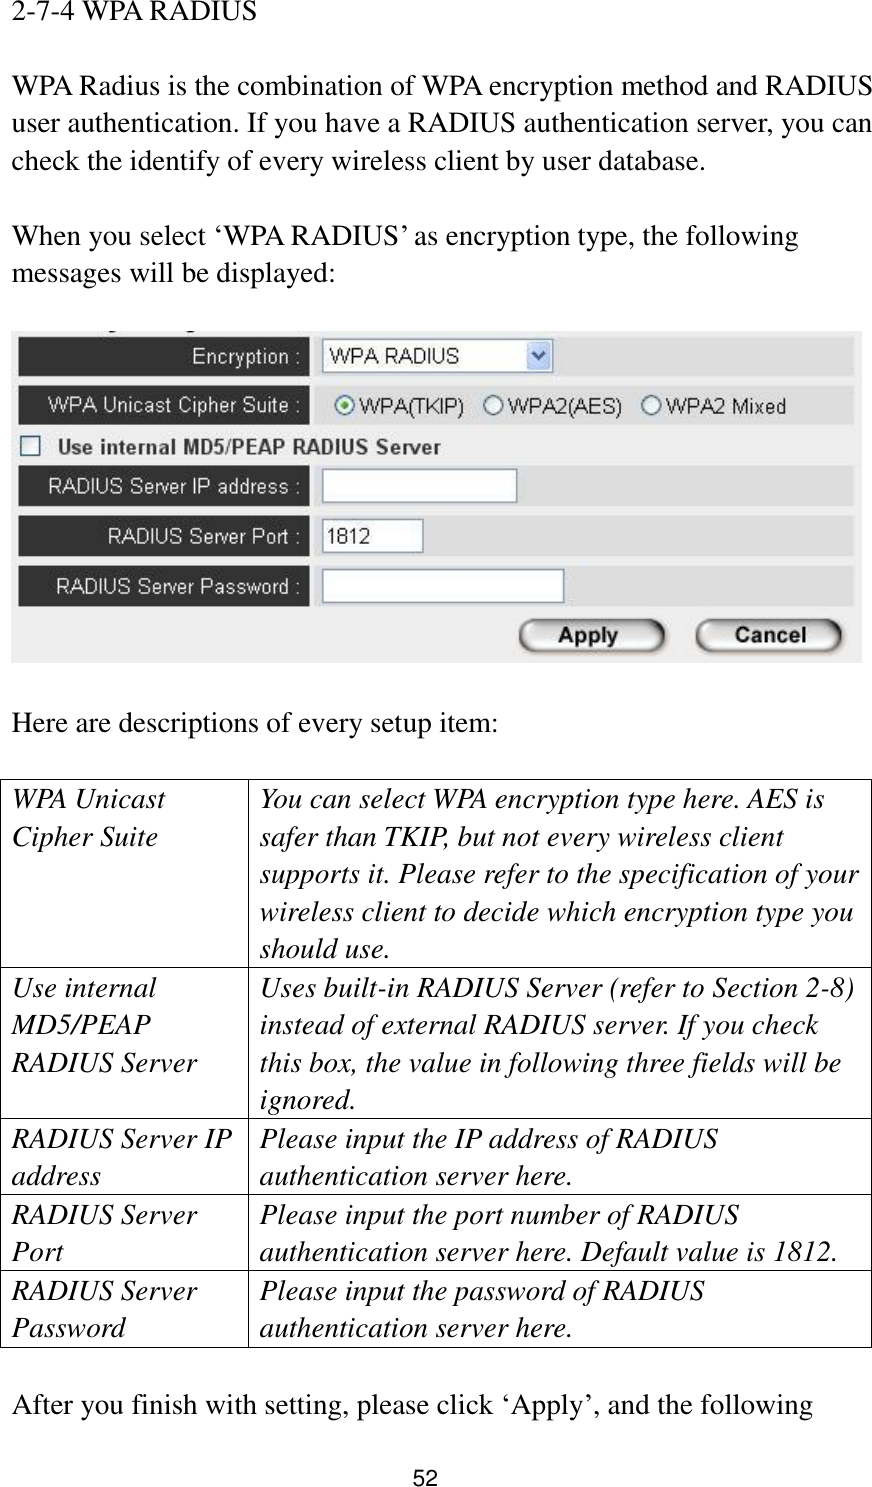 52 2-7-4 WPA RADIUS  WPA Radius is the combination of WPA encryption method and RADIUS user authentication. If you have a RADIUS authentication server, you can check the identify of every wireless client by user database.  When you select „WPA RADIUS‟ as encryption type, the following messages will be displayed:    Here are descriptions of every setup item:  WPA Unicast Cipher Suite You can select WPA encryption type here. AES is safer than TKIP, but not every wireless client supports it. Please refer to the specification of your wireless client to decide which encryption type you should use. Use internal MD5/PEAP RADIUS Server Uses built-in RADIUS Server (refer to Section 2-8) instead of external RADIUS server. If you check this box, the value in following three fields will be ignored. RADIUS Server IP address Please input the IP address of RADIUS authentication server here. RADIUS Server Port Please input the port number of RADIUS authentication server here. Default value is 1812. RADIUS Server Password Please input the password of RADIUS authentication server here.  After you finish with setting, please click „Apply‟, and the following 